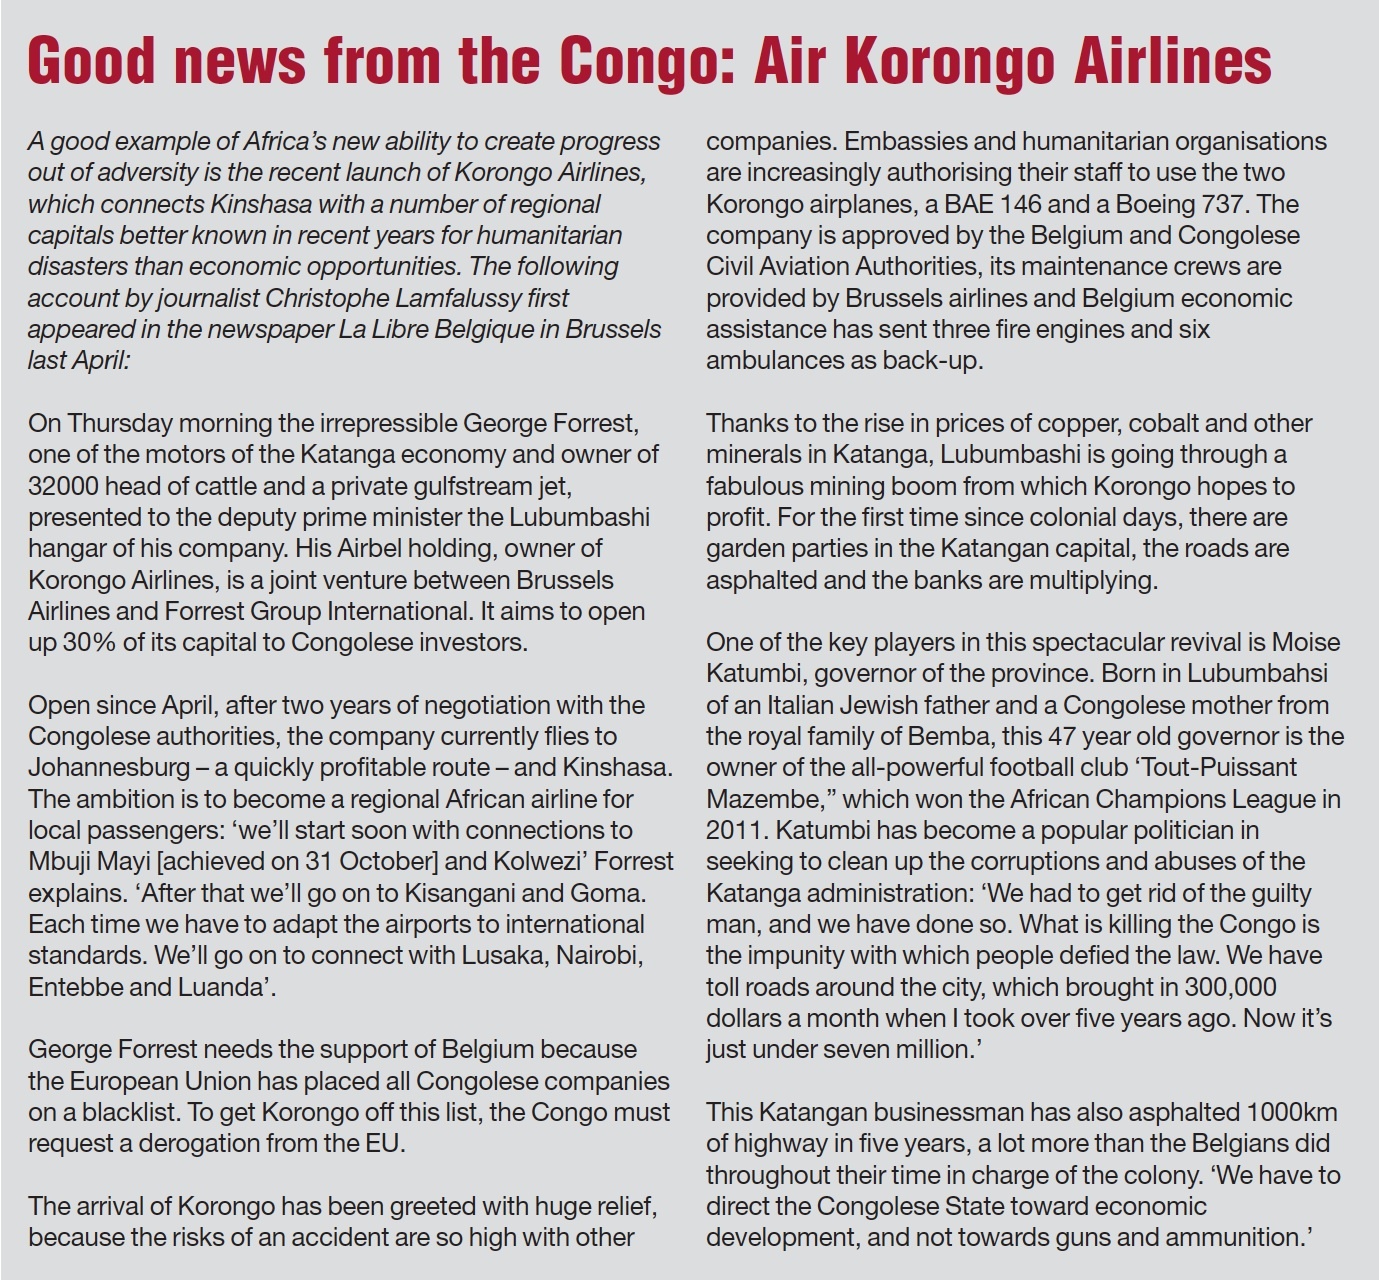 Good news from the Congo: Air Korongo Airlines A good example of Africa’s new ability to create progress out of adversity is the recent launch of Korongo Airlines, which connects Kinshasa with a number of regional capitals better known in recent years for humanitarian disasters than economic opportunities. The following account by journalist Christophe Lamfalussy first appeared in the newspaper La Libre Belgique in Brussels last April: On Thursday morning the irrepressible George Forrest, one of the motors of the Katanga economy and owner of 32000 head of cattle and a private Gulfstream jet, presented to the deputy prime minister the Lubumbashi hangar of his company. His Airbel holding, owner of Korongo Airlines, is a joint venture between Brussels Airlines and Forrest Group International. It aims to open up 30% of its capital to Congolese investors. Open since April, after two years of negotiation with the Congolese authorities, the company currently flies to Johannesburg — a quickly profitable route —- and Kinshasa. The ambition is to become a regional African airline for local passengers: ‘we’ll start soon with connections to Mbuji Mayi’\[ achieved on 31 October\]‘and Kolwezi’ Forrest explains. ‘After that we’ll go on to Kisangani and Goma. Each time we have to adapt the airports to international standards. We’ll go on to connect with Lusaka, Nairobi, Entebbe and Luanda’.\n George Forrest needs the support of Belgium because the European Union has placed all Congolese companies on a blacklist. To get Korongo off this list, the Congo must request a derogation from the EU.\n The arrival of Korongo has been greeted with huge relief, because the risks of an accident are so high with other companies. Embassies and humanitarian organisations are increasingly authorising their staff to use the two Korongo airplanes, a BAE 146 and a Boeing 737. The company is approved by the Belgium and Congolese Civil Aviation Authorities, its maintenance crews are provided by Brussels airlines and Belgium economic assistance has sent three fire engines and six ambulances as back-up.\n Thanks to the rise in prices of copper, cobalt and other minerals in Katanga, Lubumbashi is going through a fabulous mining boom from which Korongo hopes to profit. For the first time since colonial days, there are garden parties in the Katangan capital, the roads are asphalted and the banks are multiplying.\n One of the key players in this spectacular revival is Moise Katumbi, governor of the province. Born in Lubumbahsi of an Italian Jewish father and a Congolese mother from the royal family of Bemba, this 47 year old governor is the owner of the all-powerful football club ‘Tout-Puissant Mazembe,” which won the African Champions League in 2011. Katumbi has become a popular politician in seeking to clean up the corruptions and abuses of the Katanga administration: ‘We had to get rid of the guilty man, and we have done so. What is killing the Congo is the impunity with which people defied the law. We have toll roads around the city, which brought in 300,000 dollars a month when | took over five years ago. Now it’s just under seven million.”\n This Katangan businessman has also asphalted 1000km of highway in five years, a lot more than the Belgians did throughout their time in charge of the colony. ‘We have to direct the Congolese State toward economic development, and not towards guns and ammunition.’